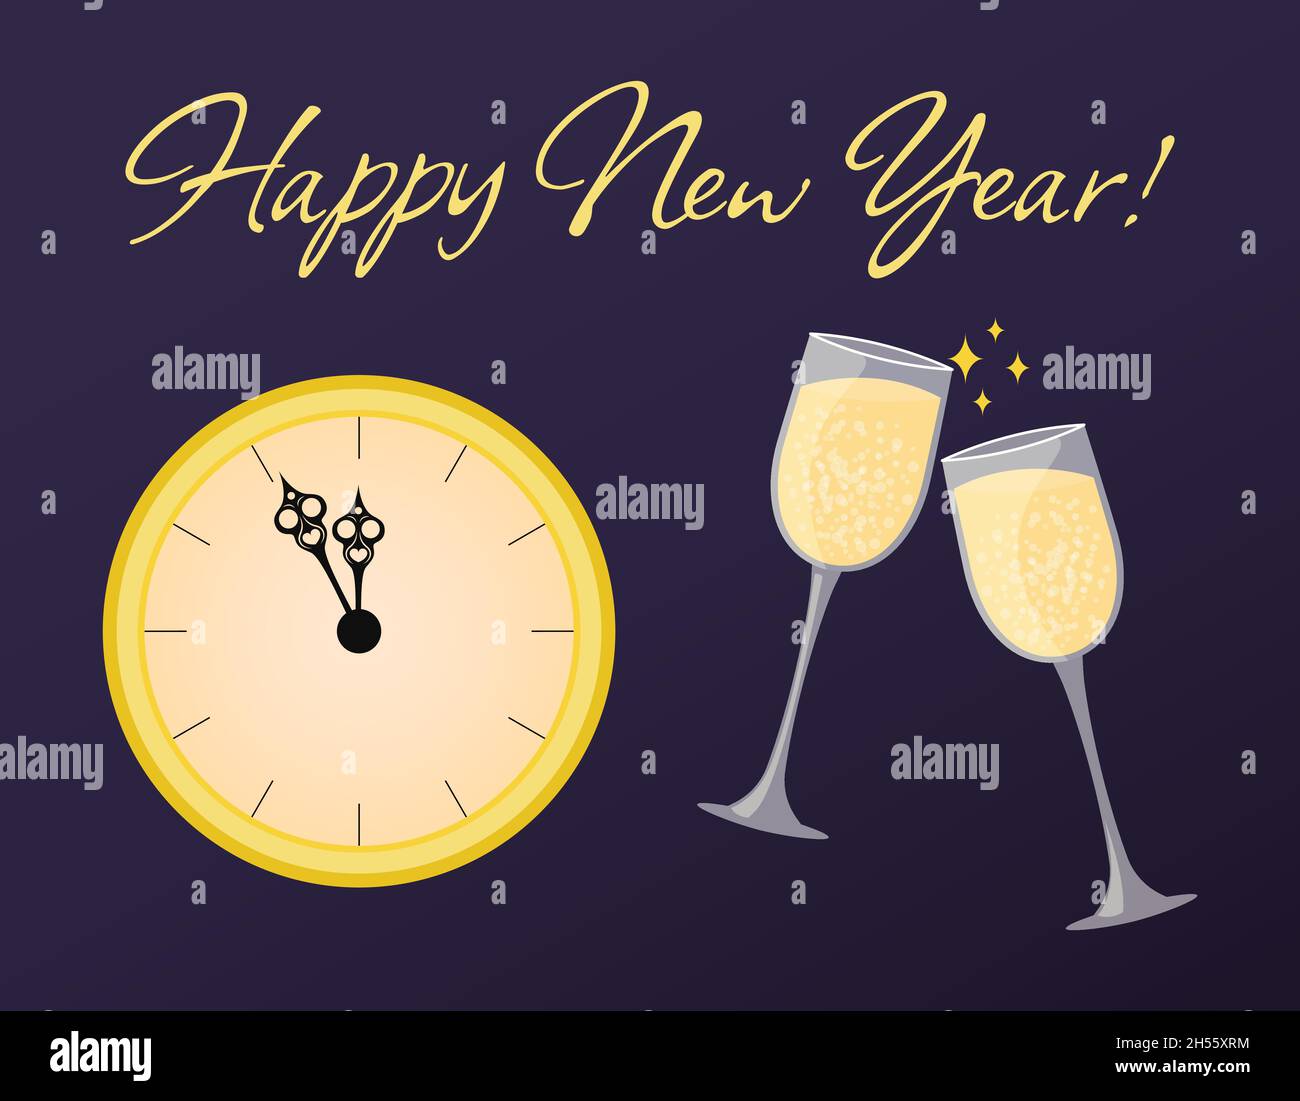 Happy New year greeting card. Midnight on clock and two glasses of champagne clink. New years eve countdown. Vector illustration. Stock Vector